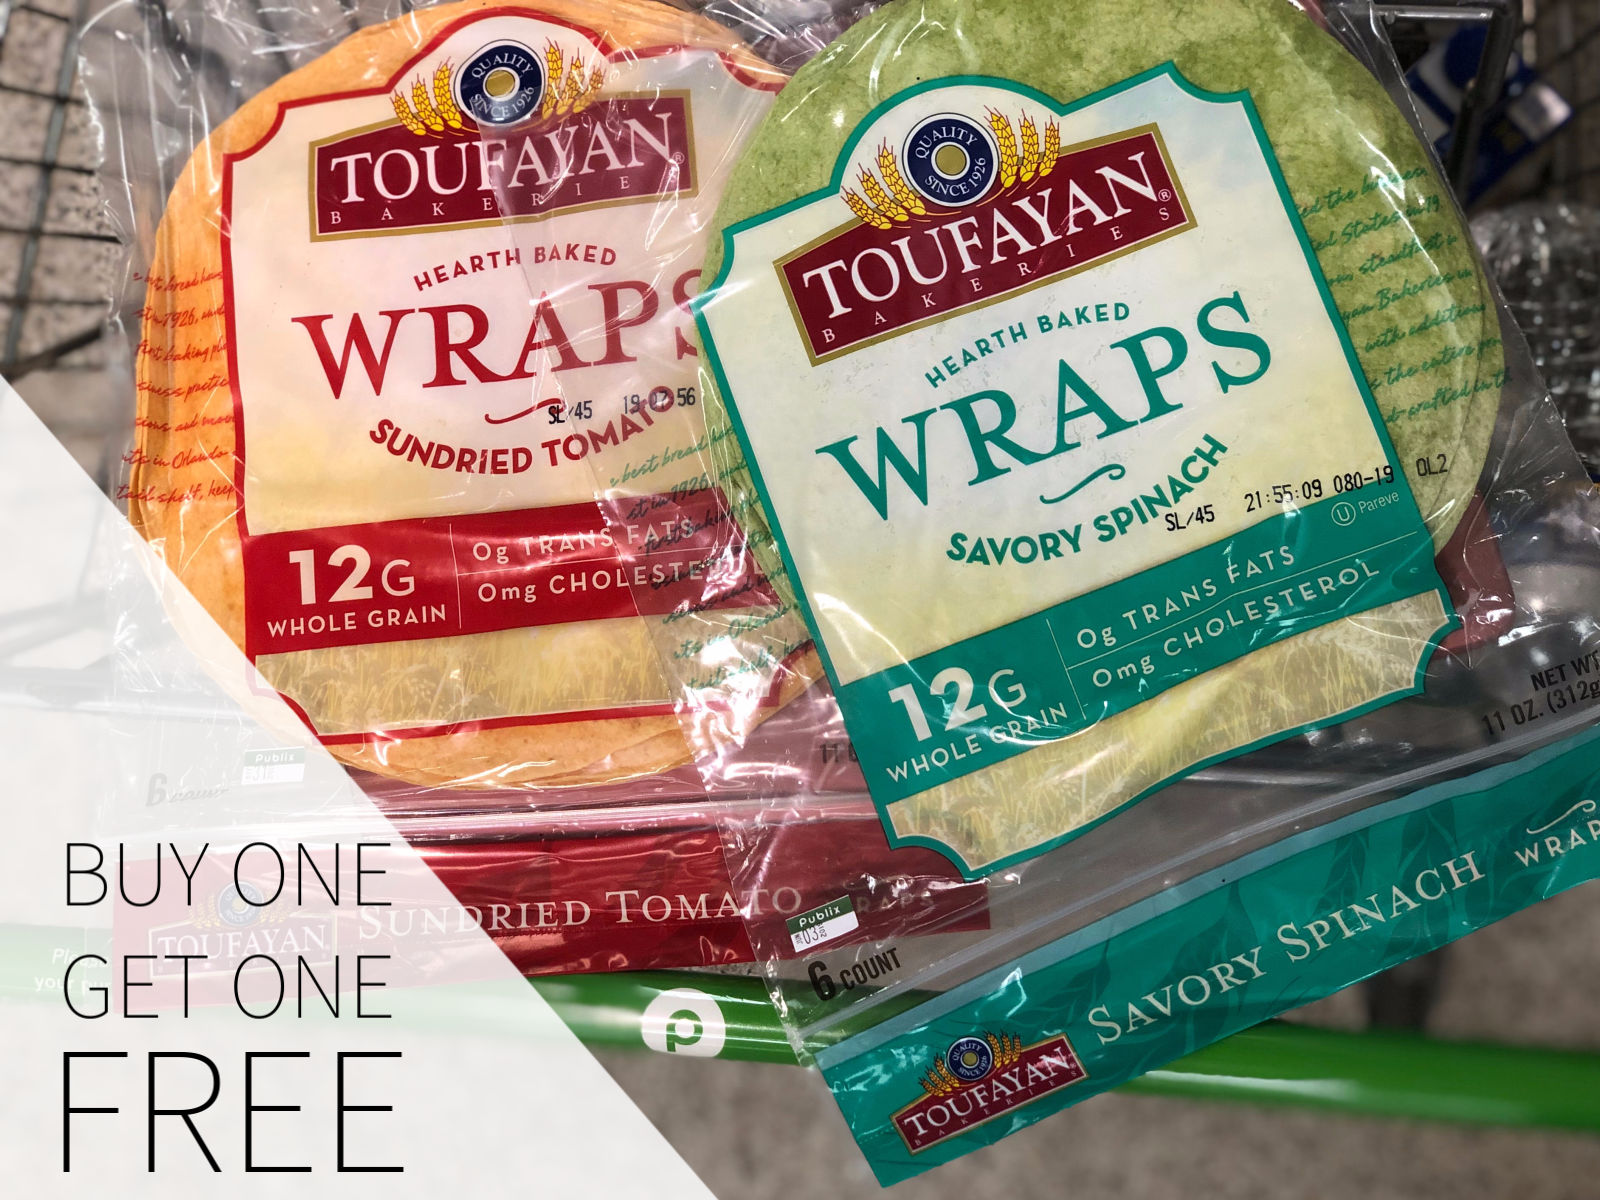 Stock Up On Toufayan Wraps At Publix - Buy One, Get One FREE! on I Heart Publix 1